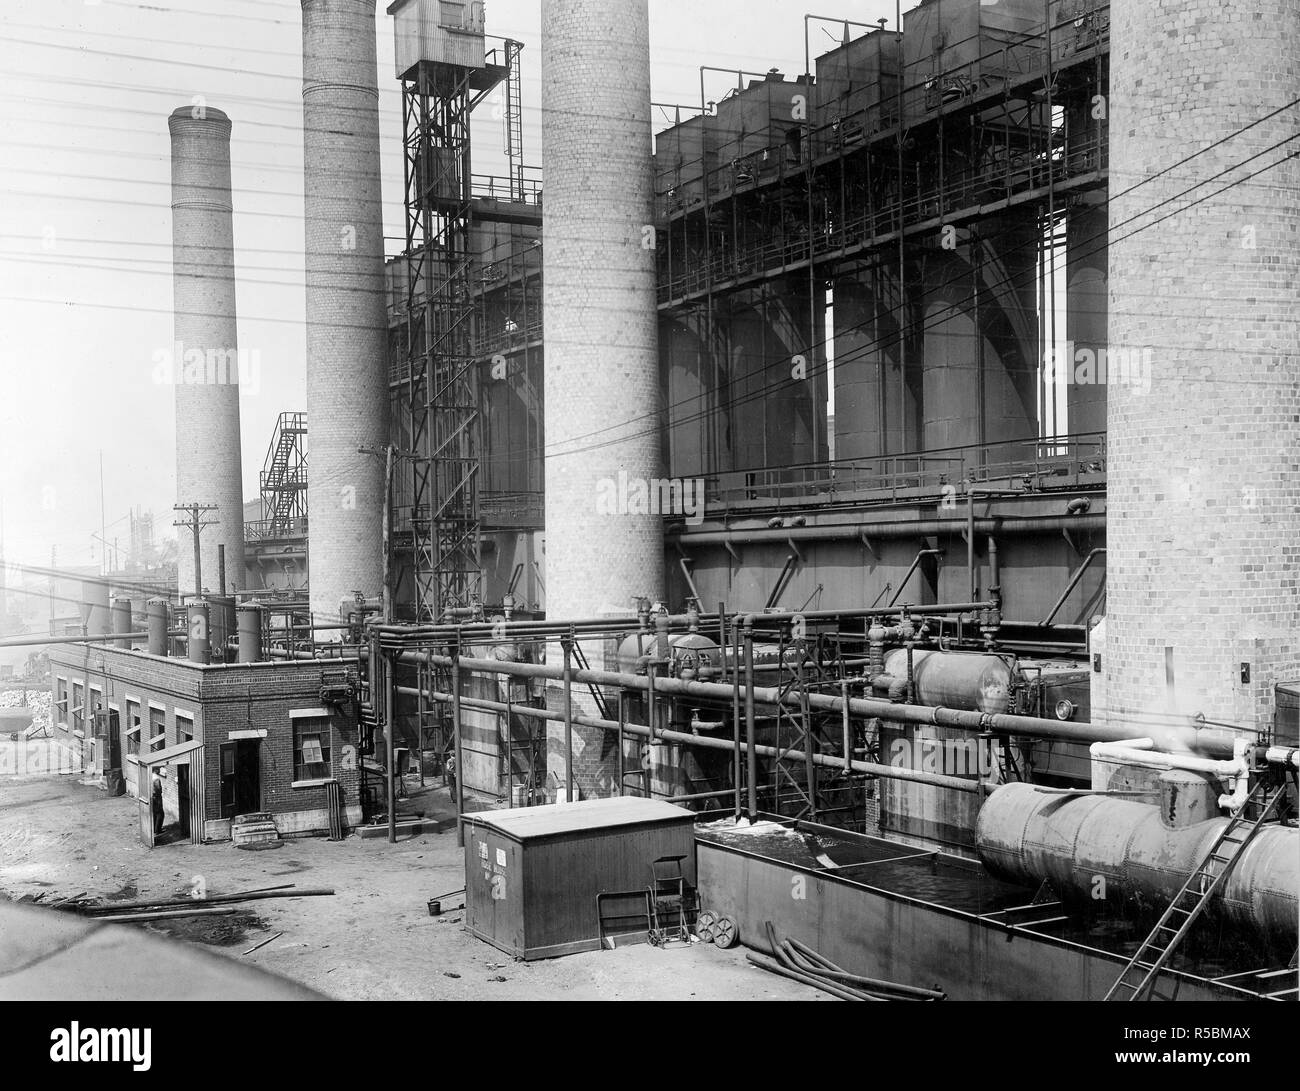 PREPARATION OF CRUDE OIL Products for the U.S. Government at the Atlantic Refining Co. Plant, Philadelphia, Pennsylvania. Vertical pressure stills fro the production of crude motor gasoline ca. 1918 Stock Photo